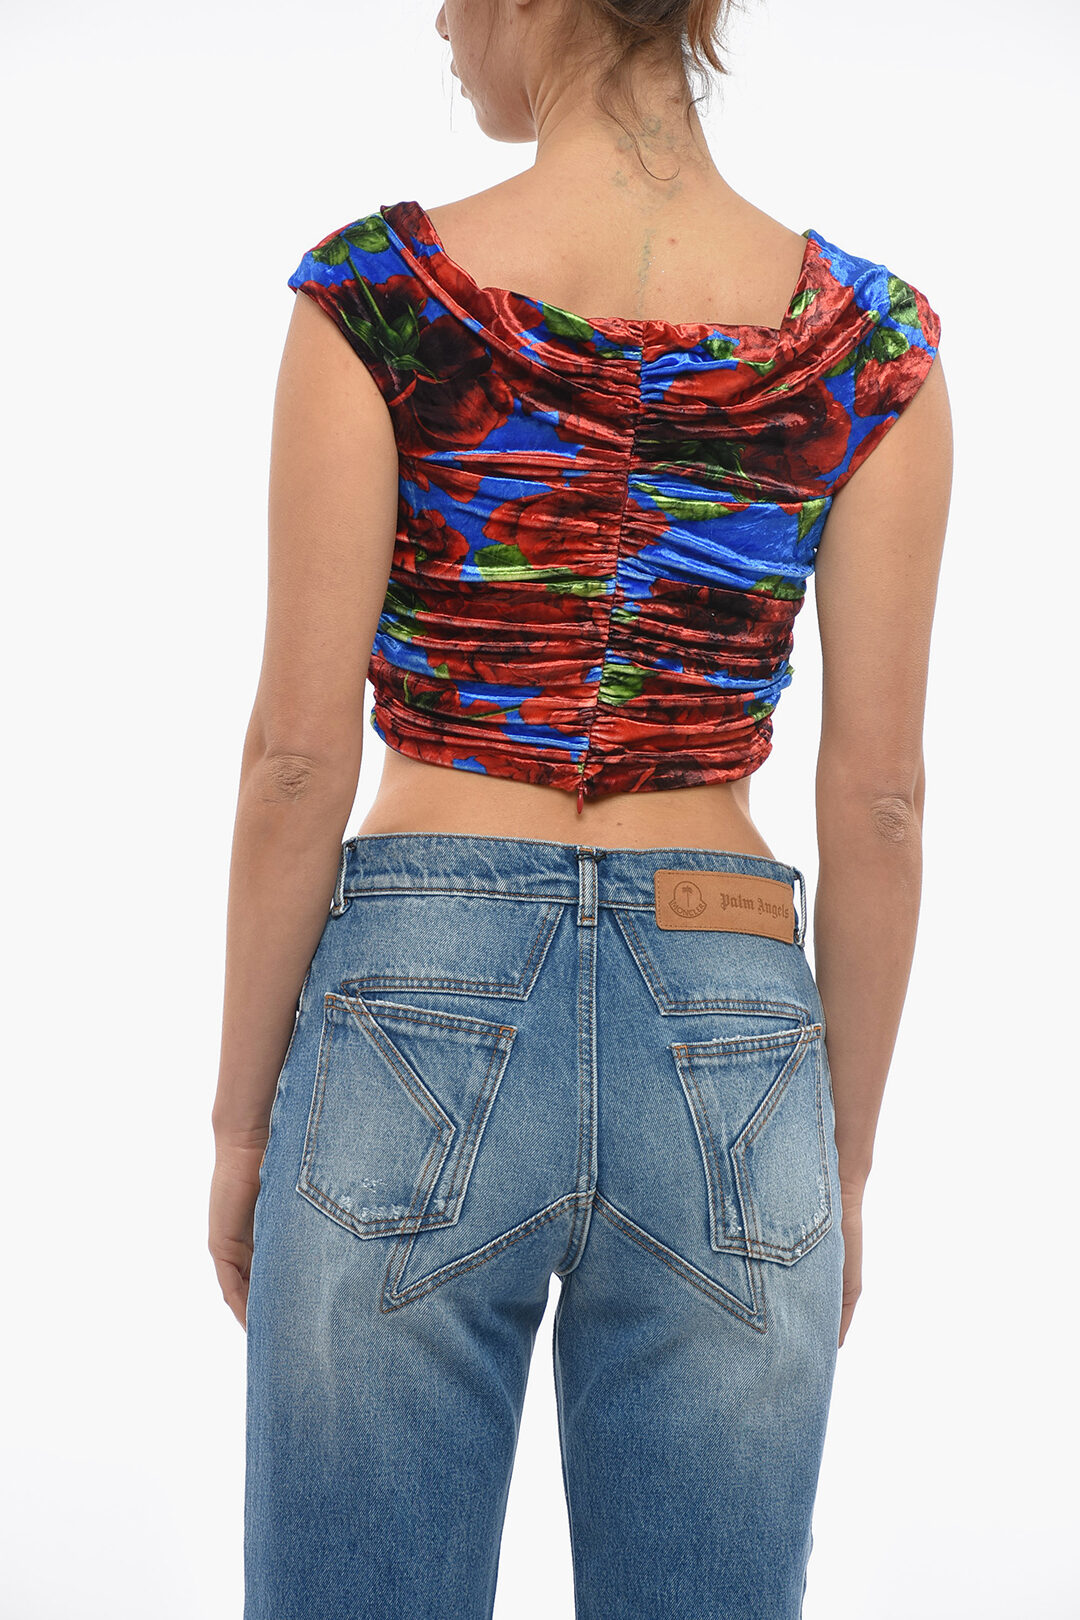 https://data.glamood.com/imgprodotto/floral-patterned-velvet-crop-top-with-cut-out-detail_1439466_zoom.jpg